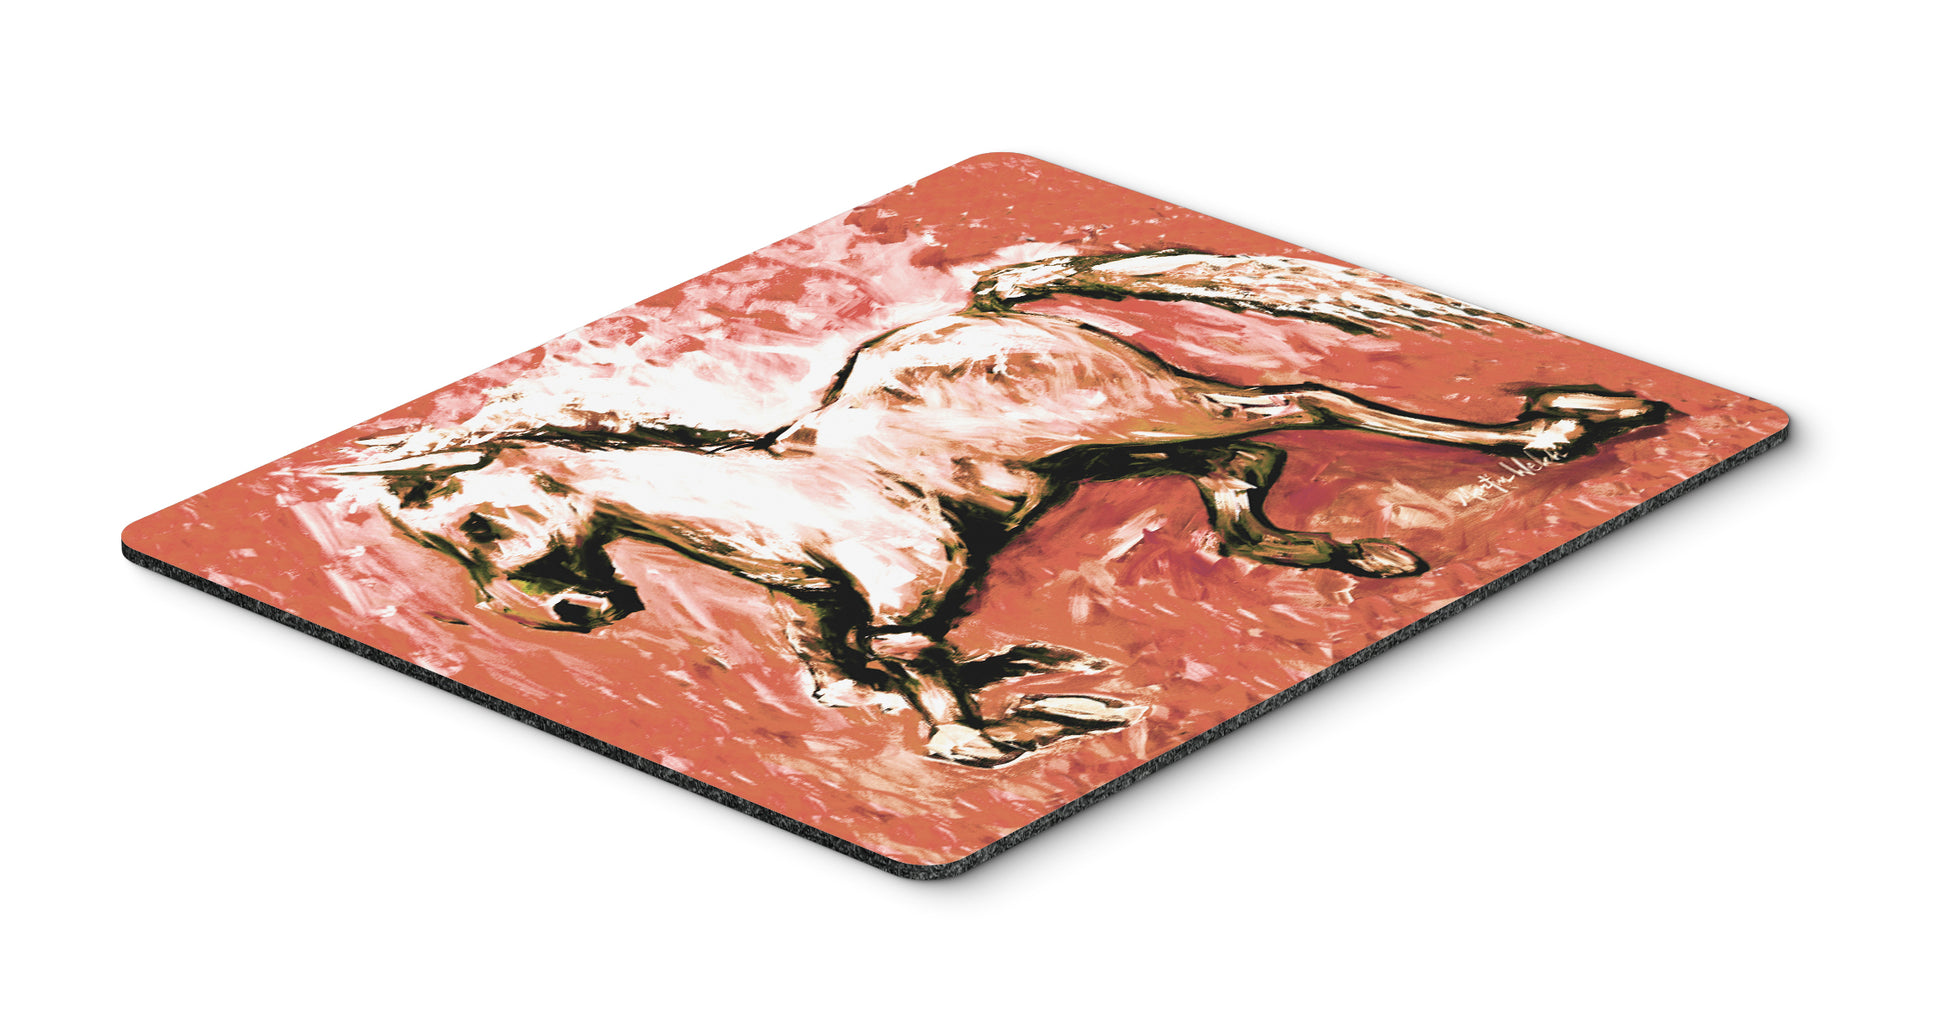 Buy this Shadow the Horse in Red Mouse Pad, Hot Pad or Trivet